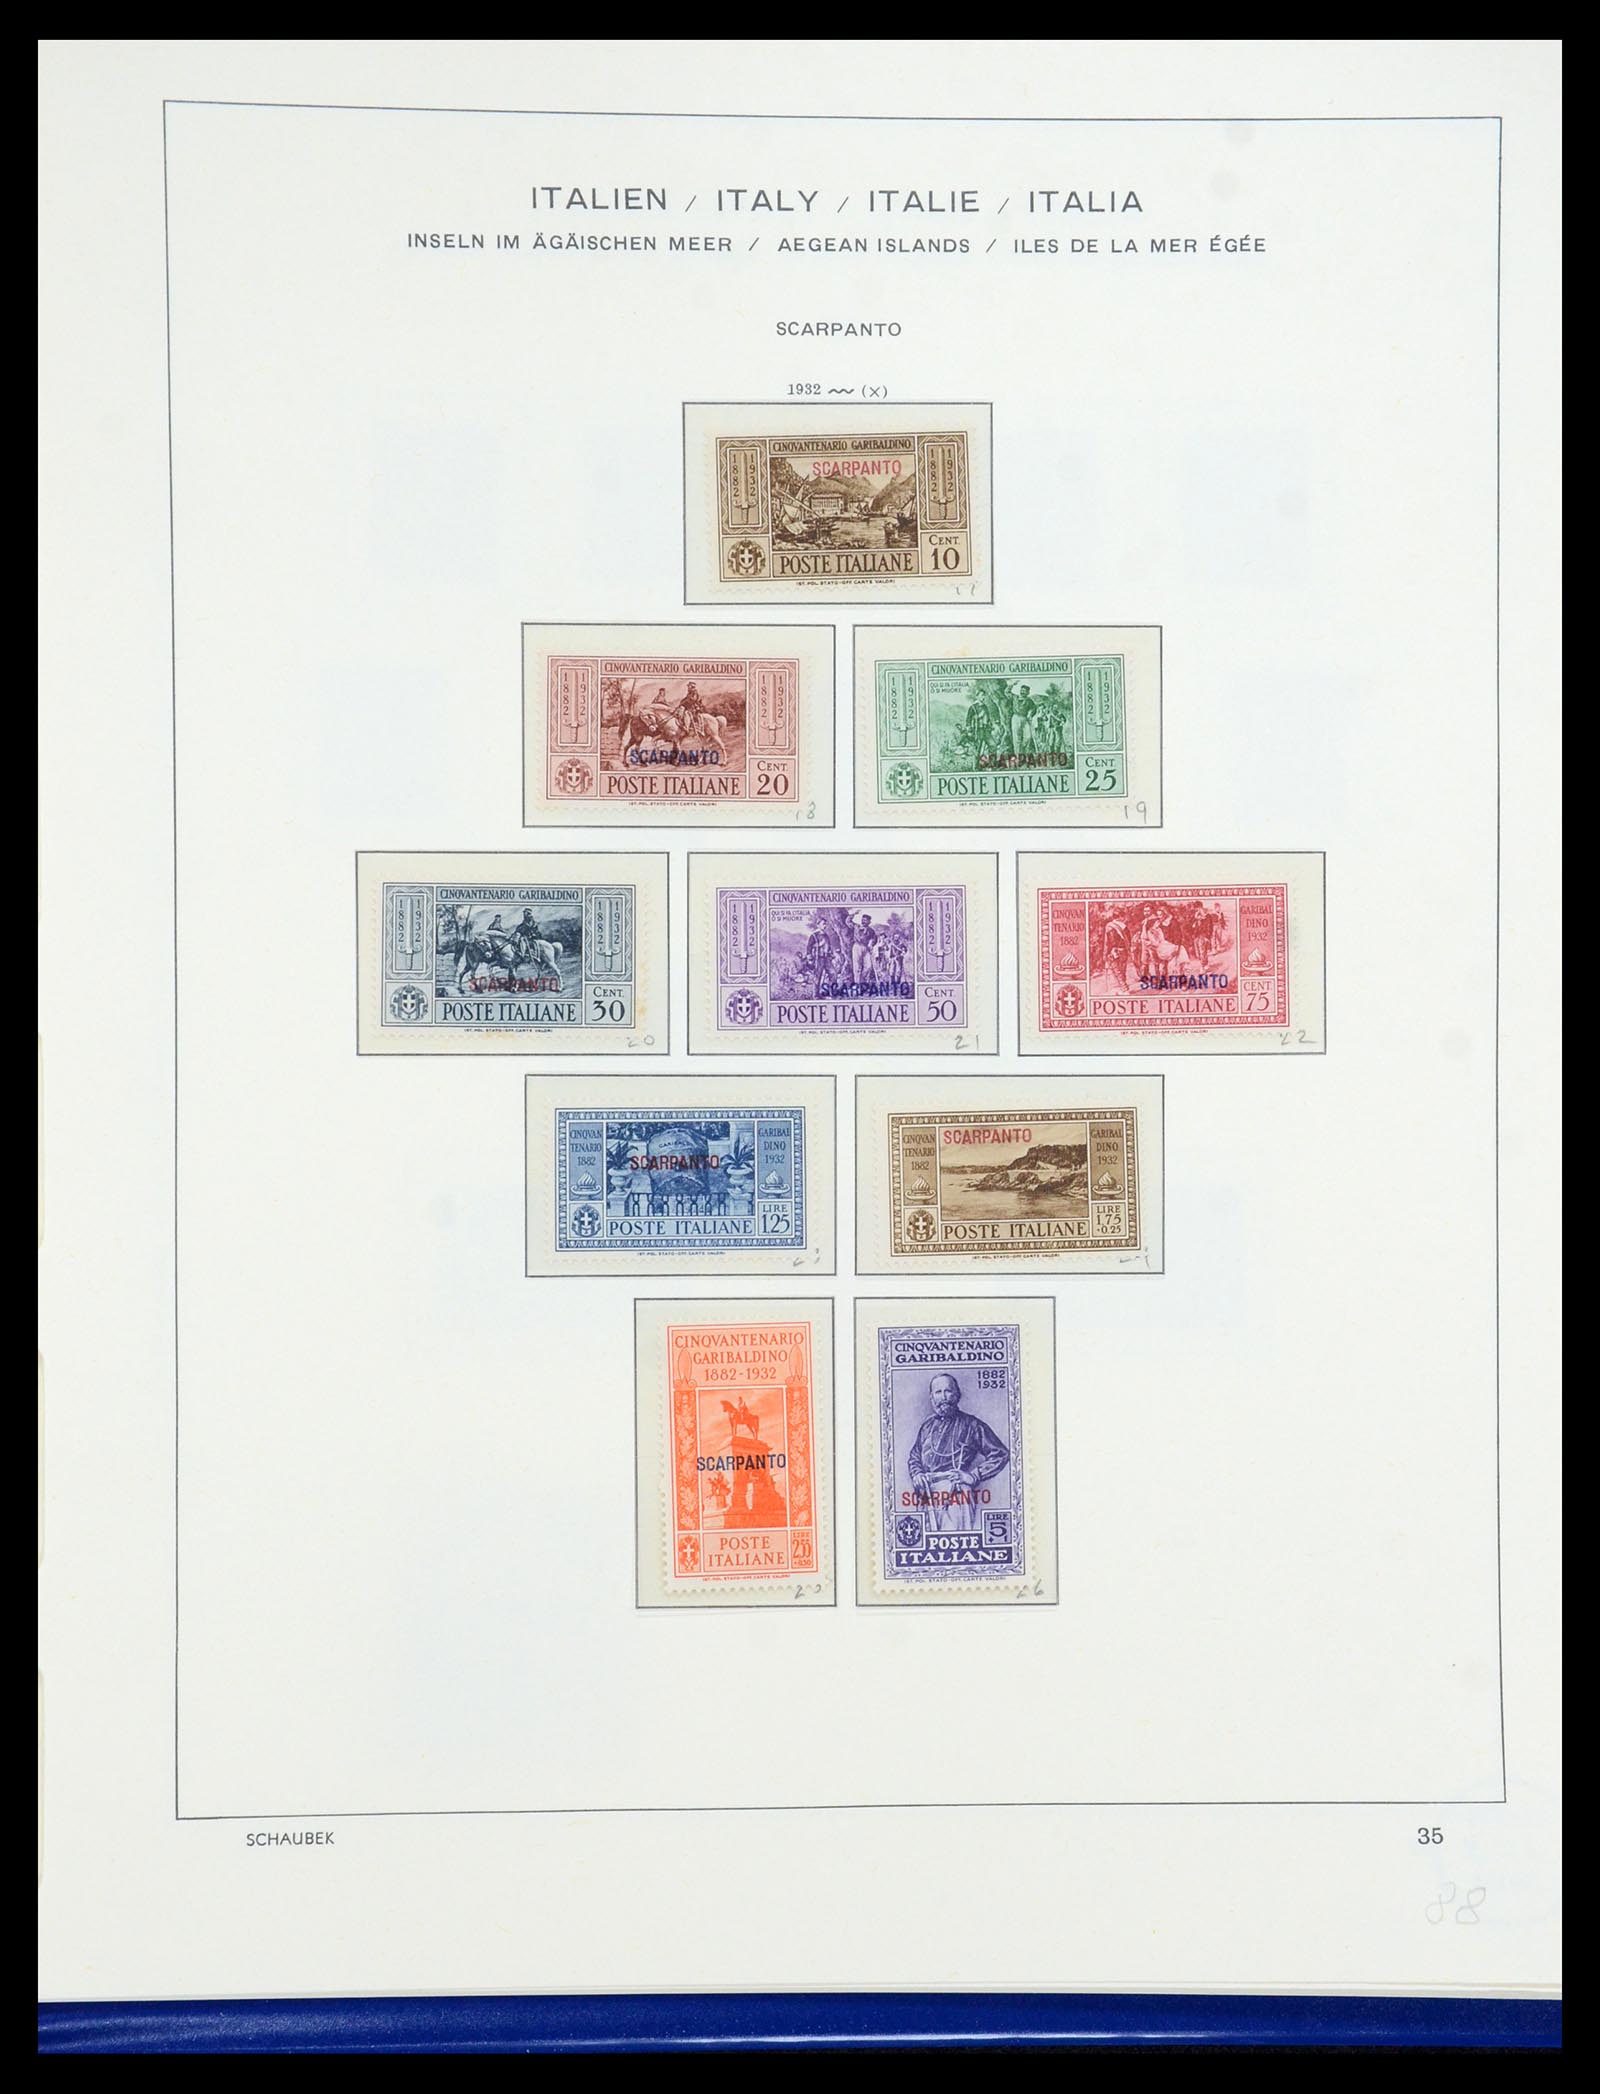 36181 050 - Stamp collection 36181 Italian Aegean Islands 1912-1941.